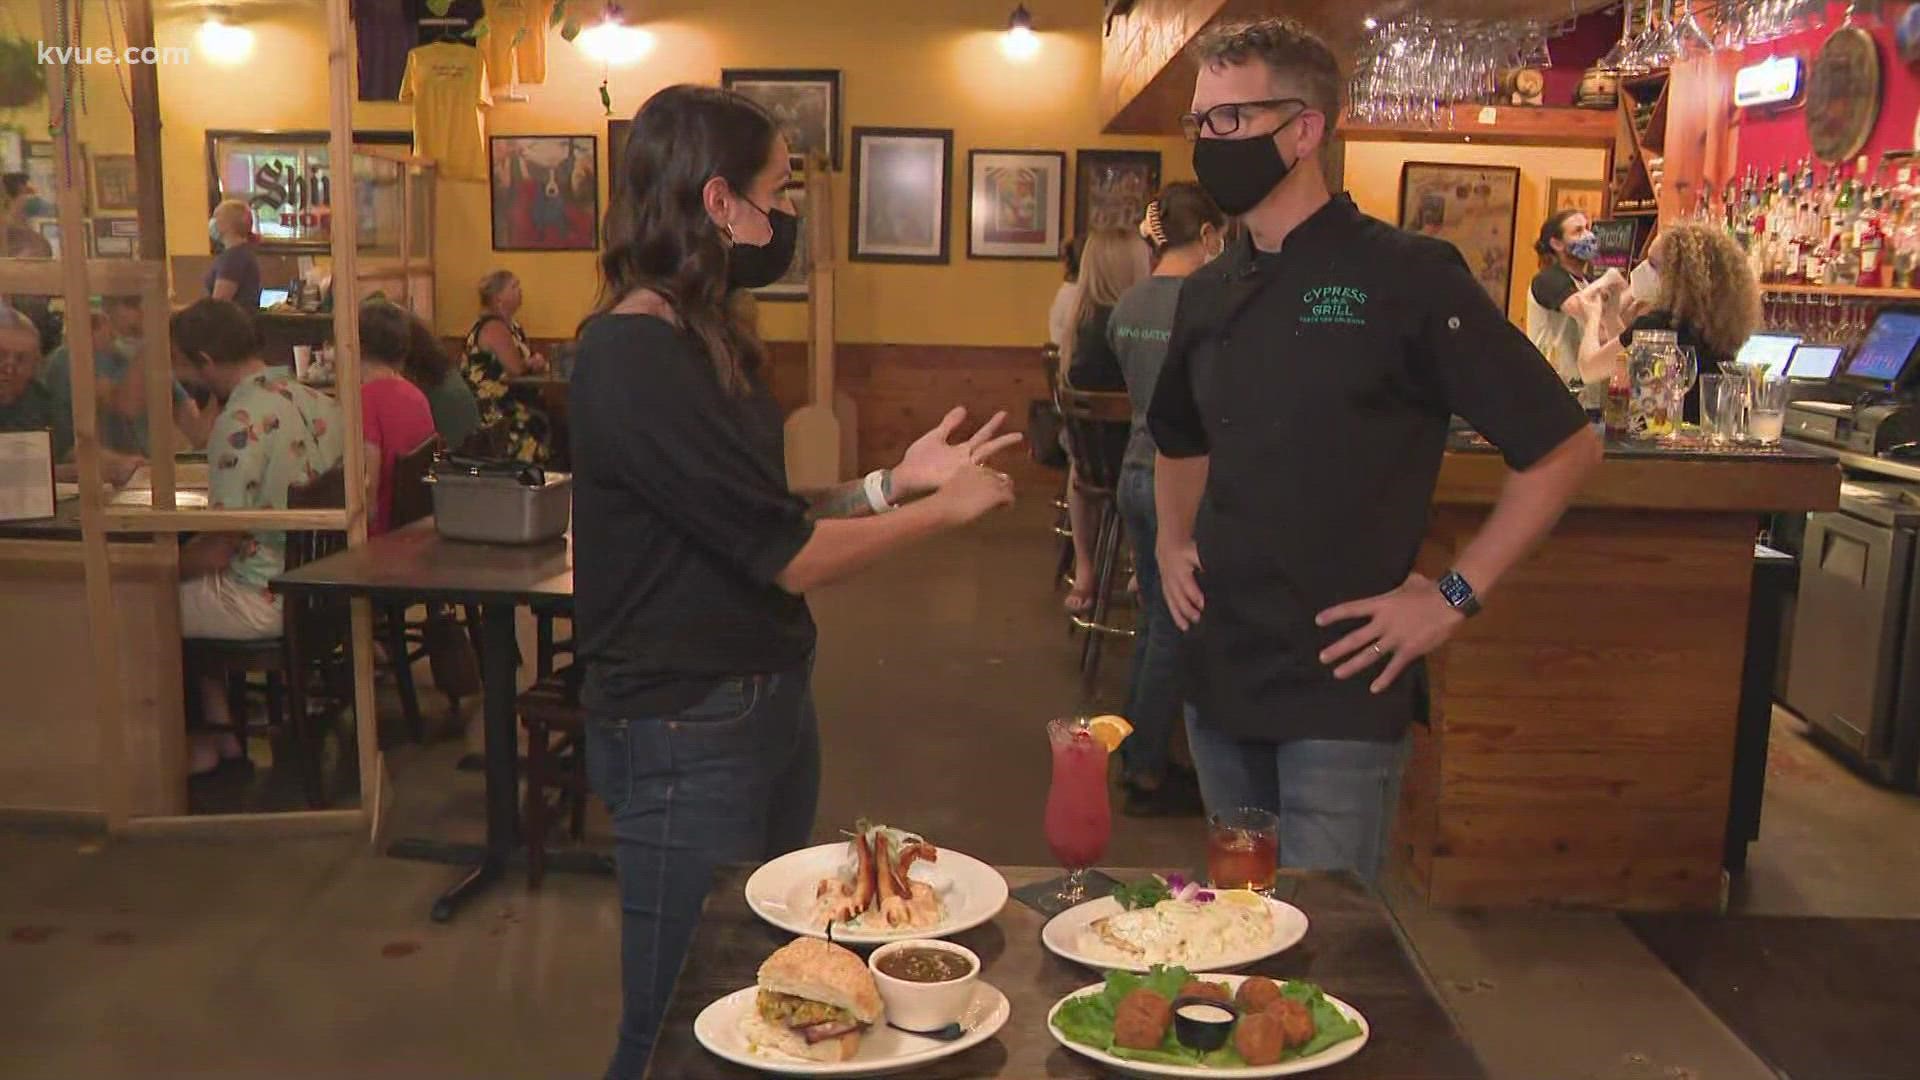 For this edition of Keep Austin Local, KVUE visits Cypress Grill in southwest Austin. The restaurant is serving up Louisiana cooking with a local twist.